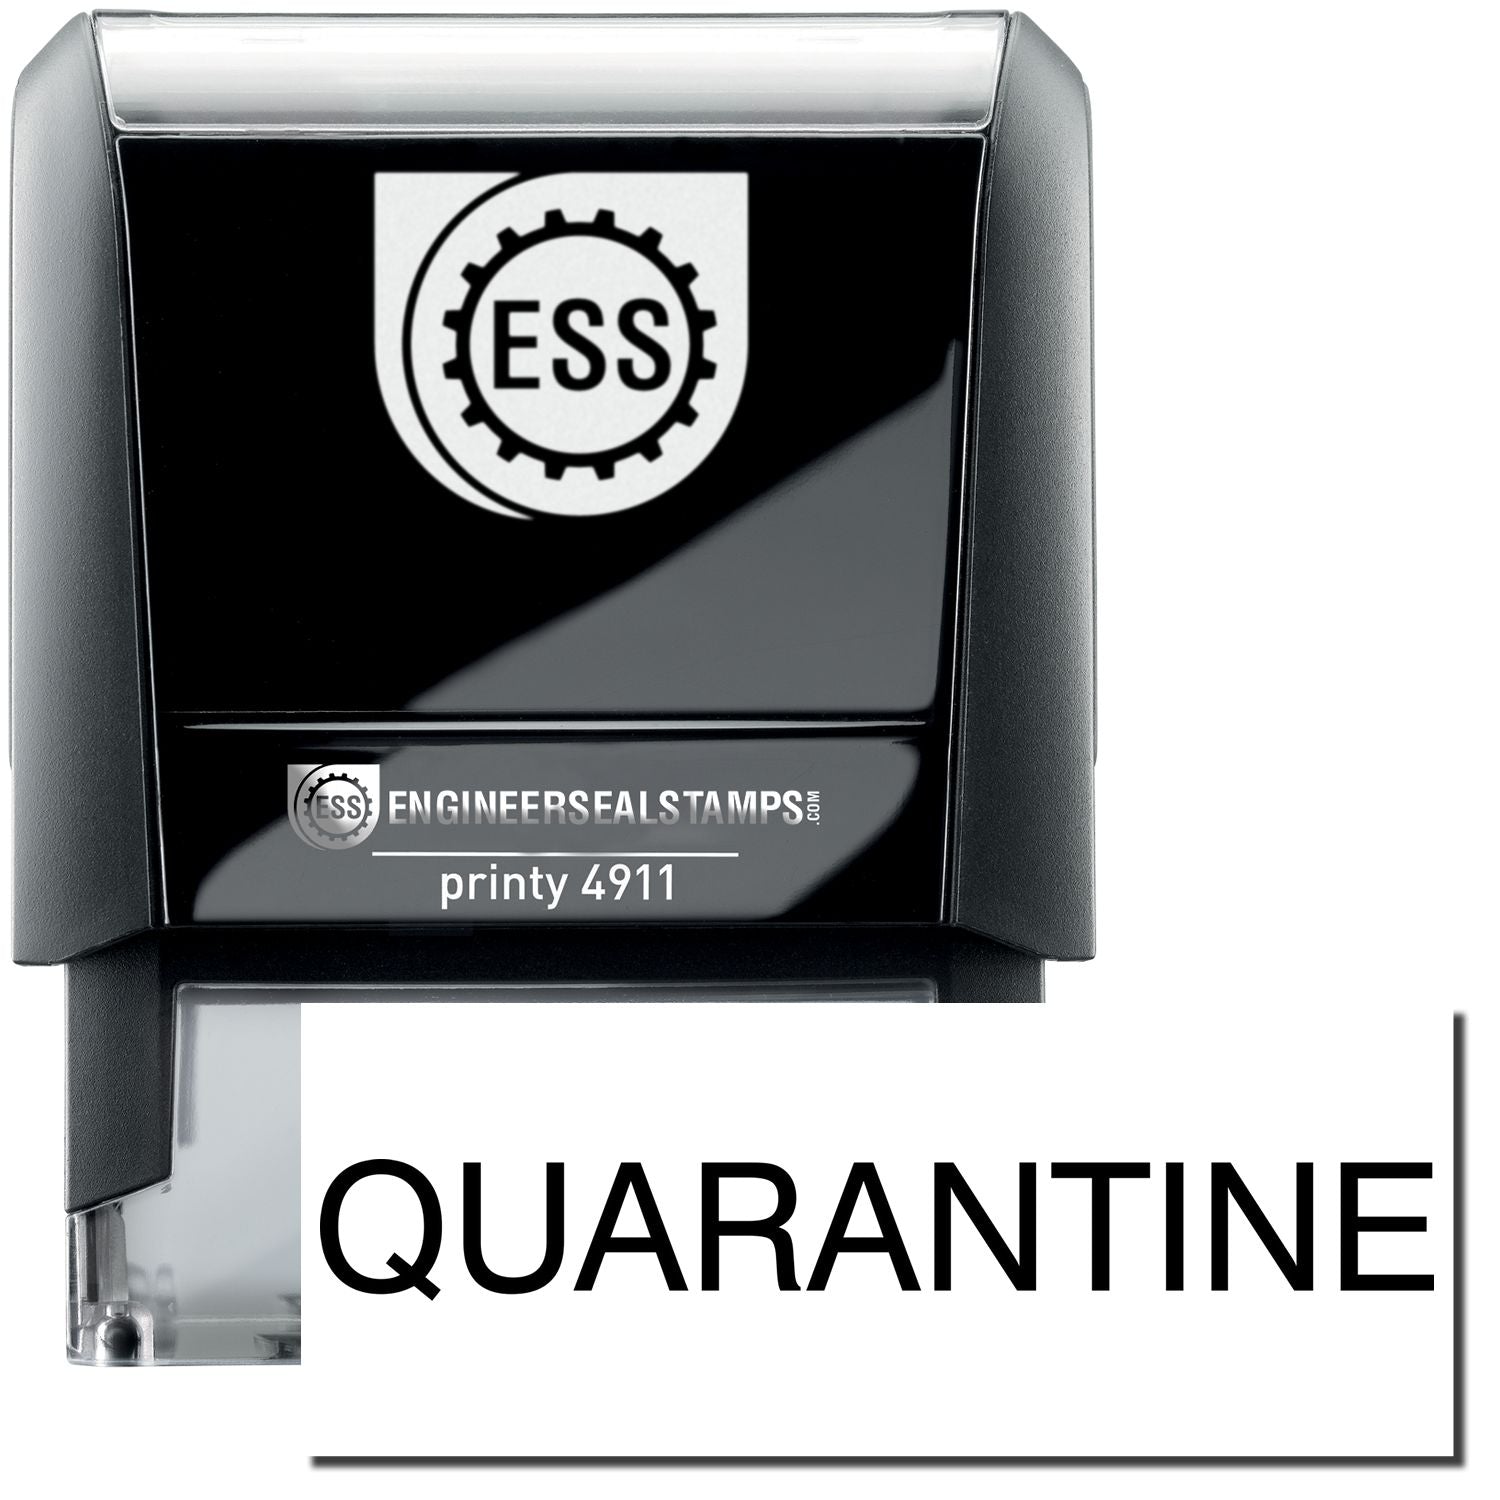 A self-inking stamp with a stamped image showing how the text "QUARANTINE" is displayed after stamping.